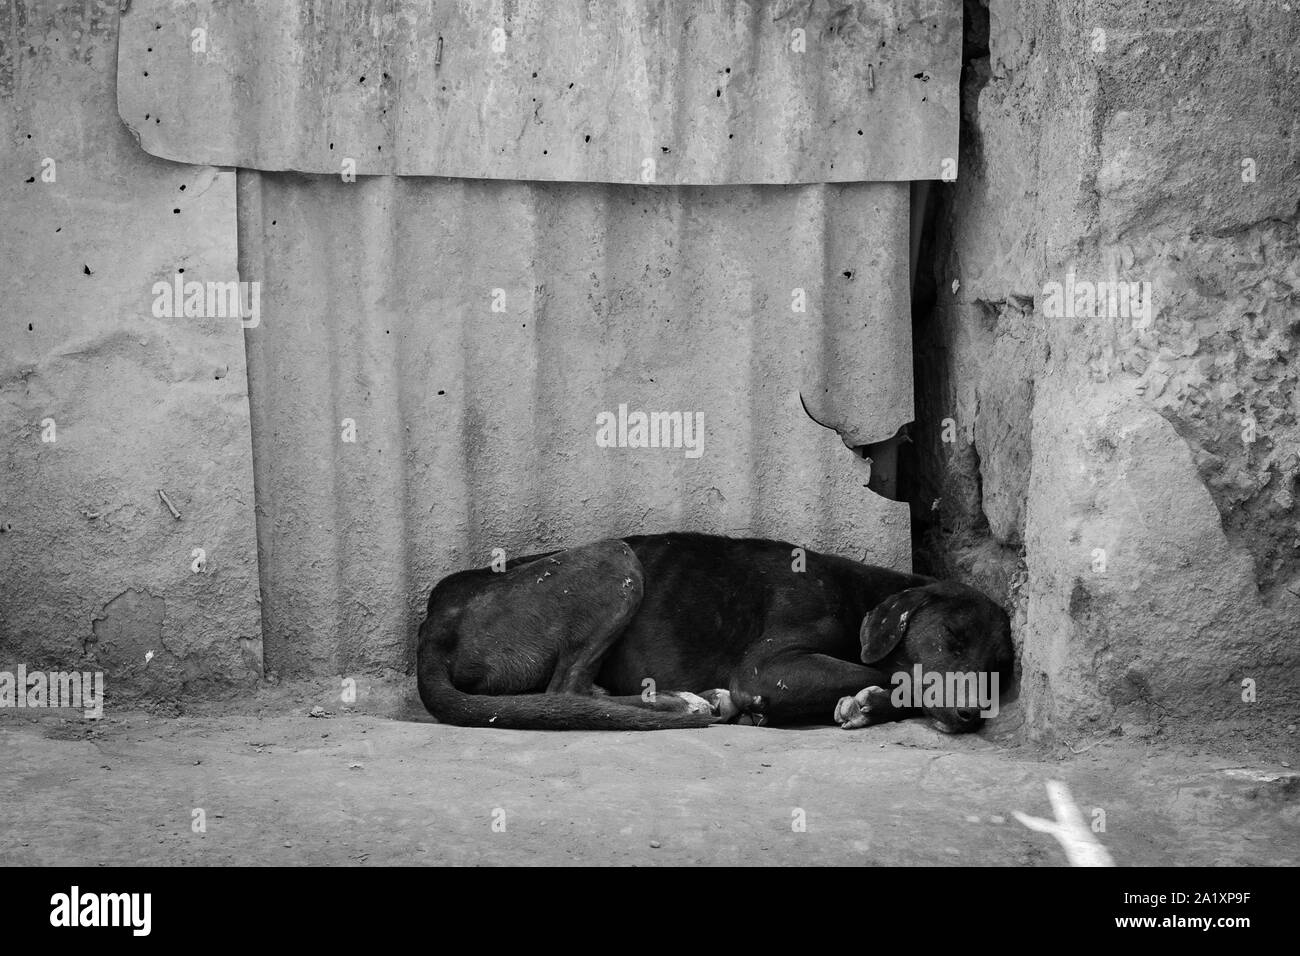 Abandoned street dog sleeping next to concrete and metal wall. Stock Photo